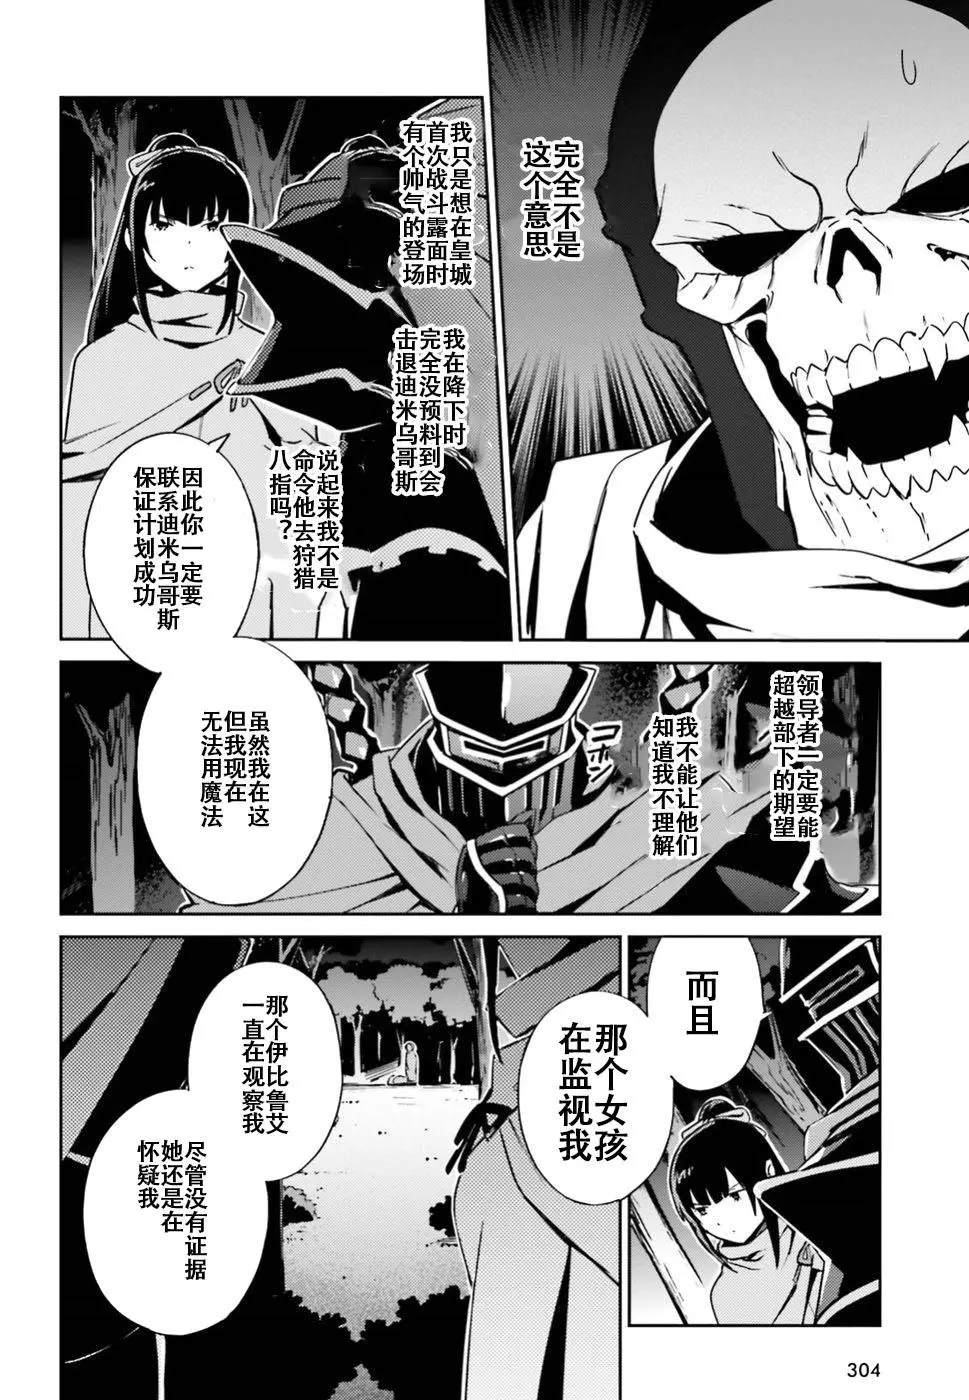 OVERLORD - 第47话 - 6